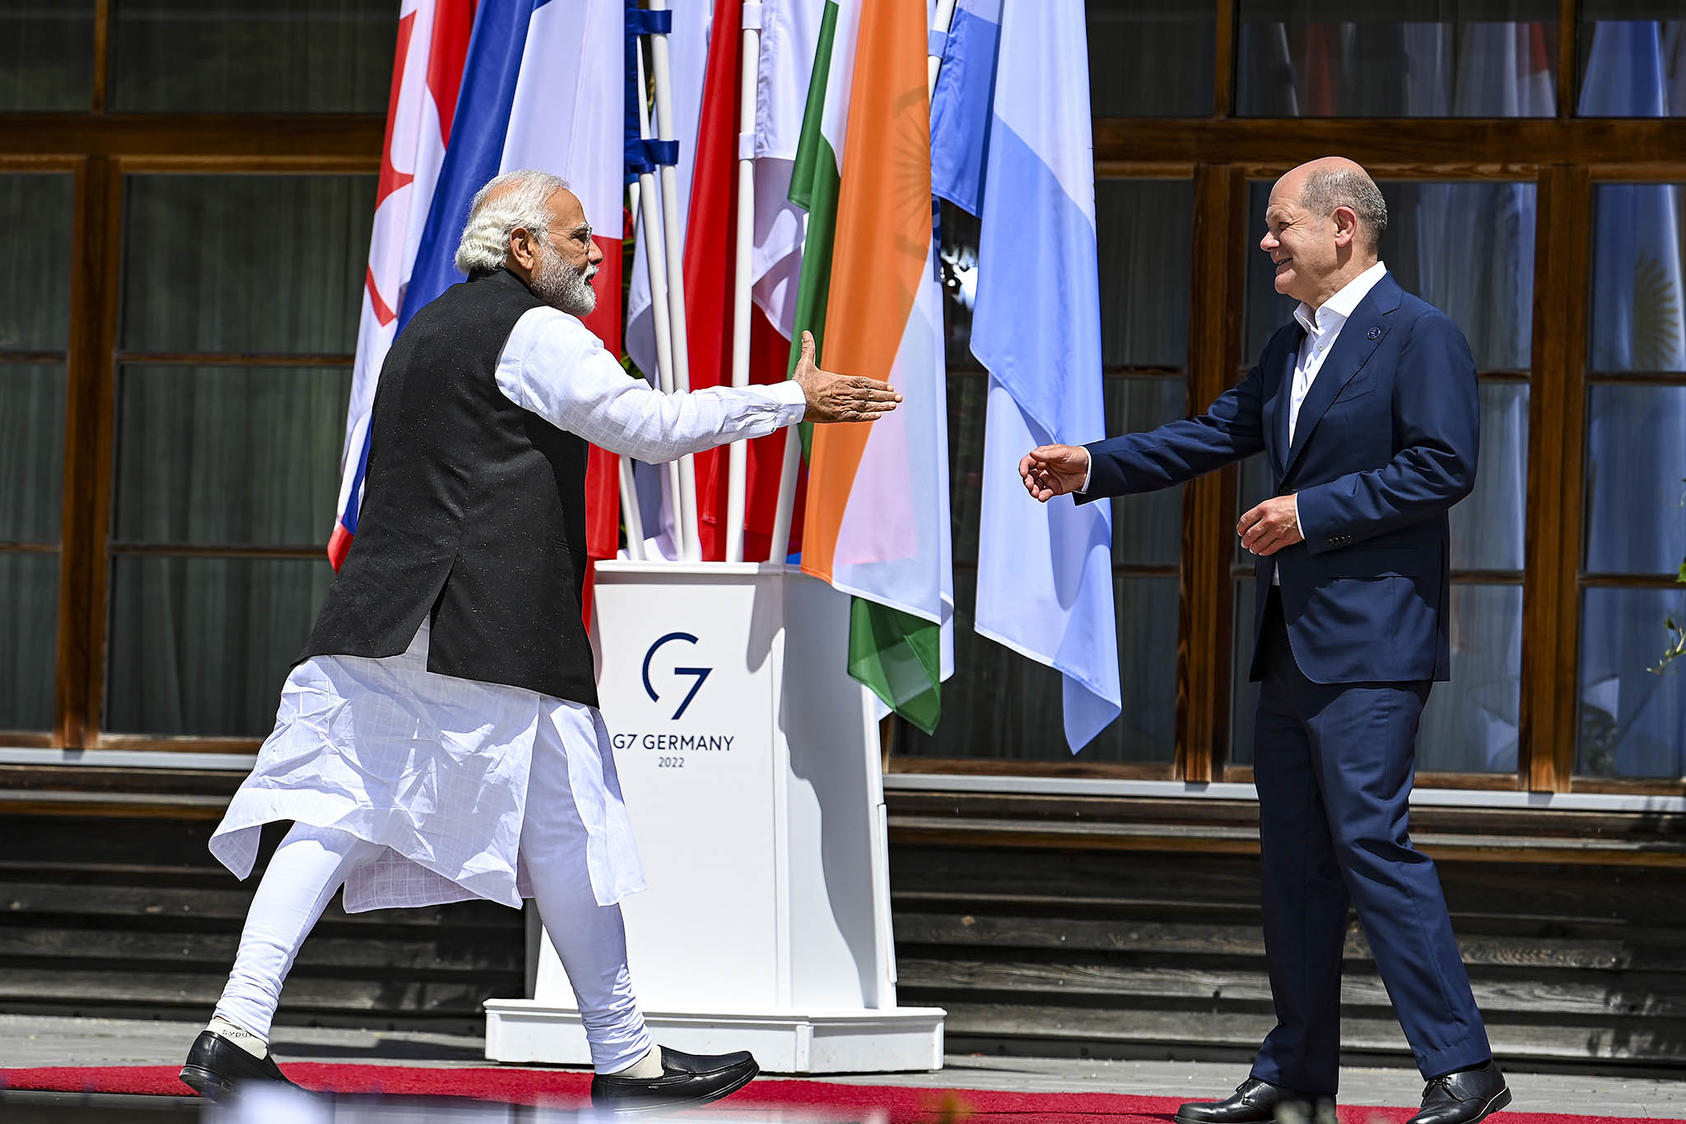 Indian Prime Minister Modi greets German Chancellor Scholz at the 2022 G-7 summit in Germany. In 2023, India will look to burnish it international influence as it chairs the G-20 and Shanghai Cooperation Organization. (Kenny Holston/The New York Times)